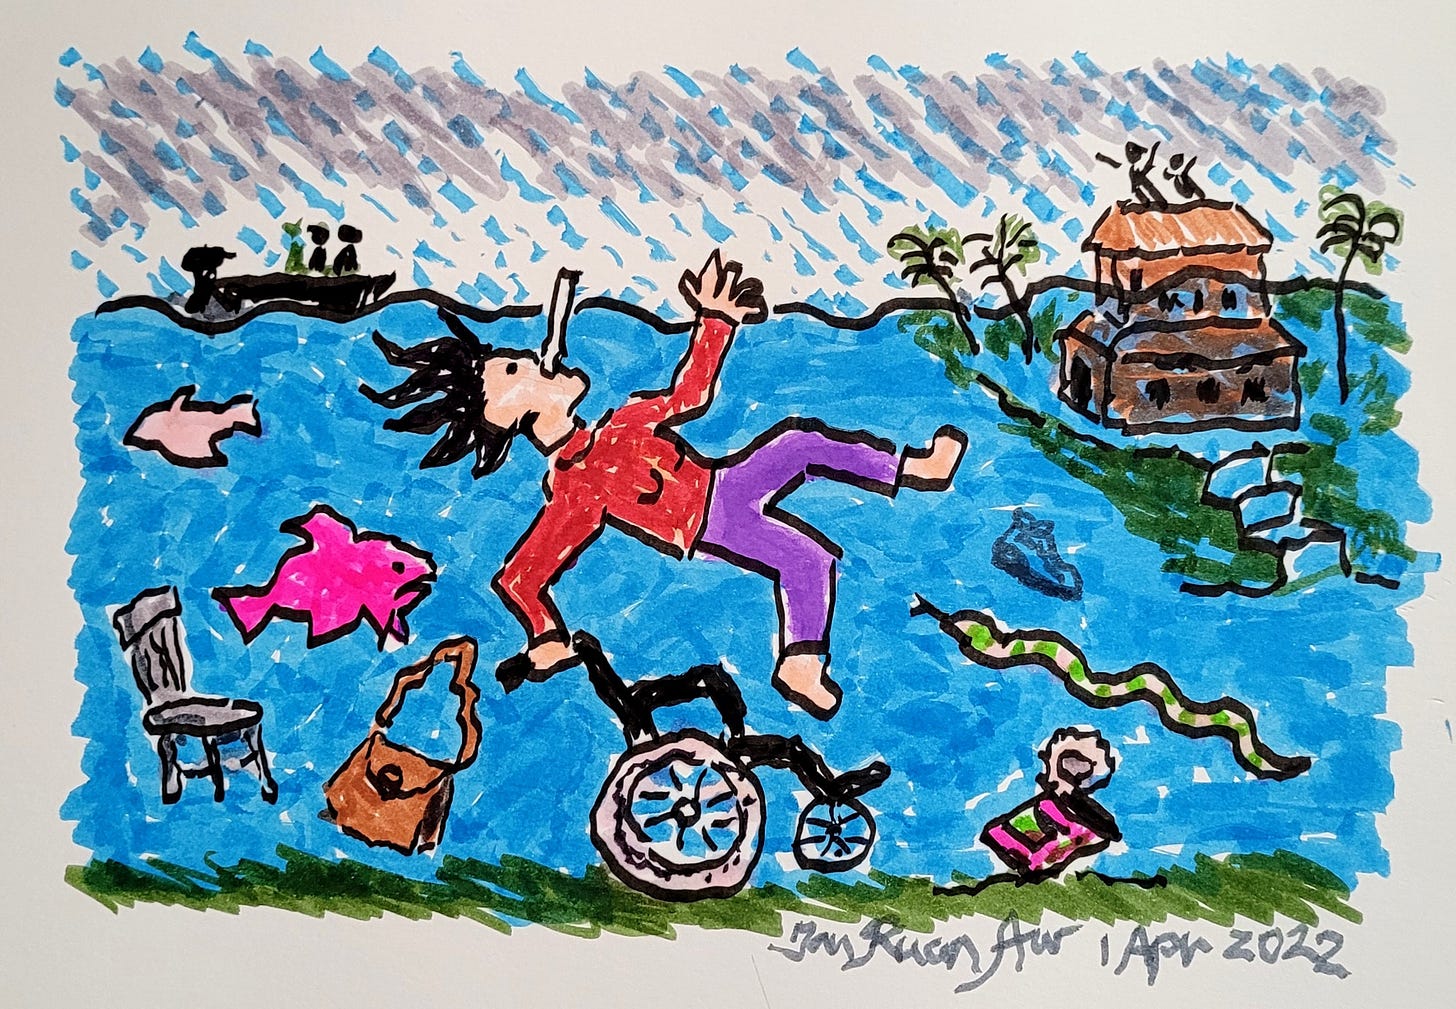 Image of a watercolour artistic representation of a disabled woman with pale skin in a flood scene: heavy blue rain against grey clouds, over deep water. In the centre, a woman is underwater with their hand reaching above the surface. Arms and legs spread out, she has black spiky hair, and her other hand holds onto a wheelchair at the bottom of the sea. Above water there is a two-story wooden house with small figures waving for help on top; steps lead up to the house. On the water there is a small boat with figures in, and in the sea there are also fishes, a snake, a can, handbag and wooden chair. Signed by Tan Kuan Aw, 1st April 2022.